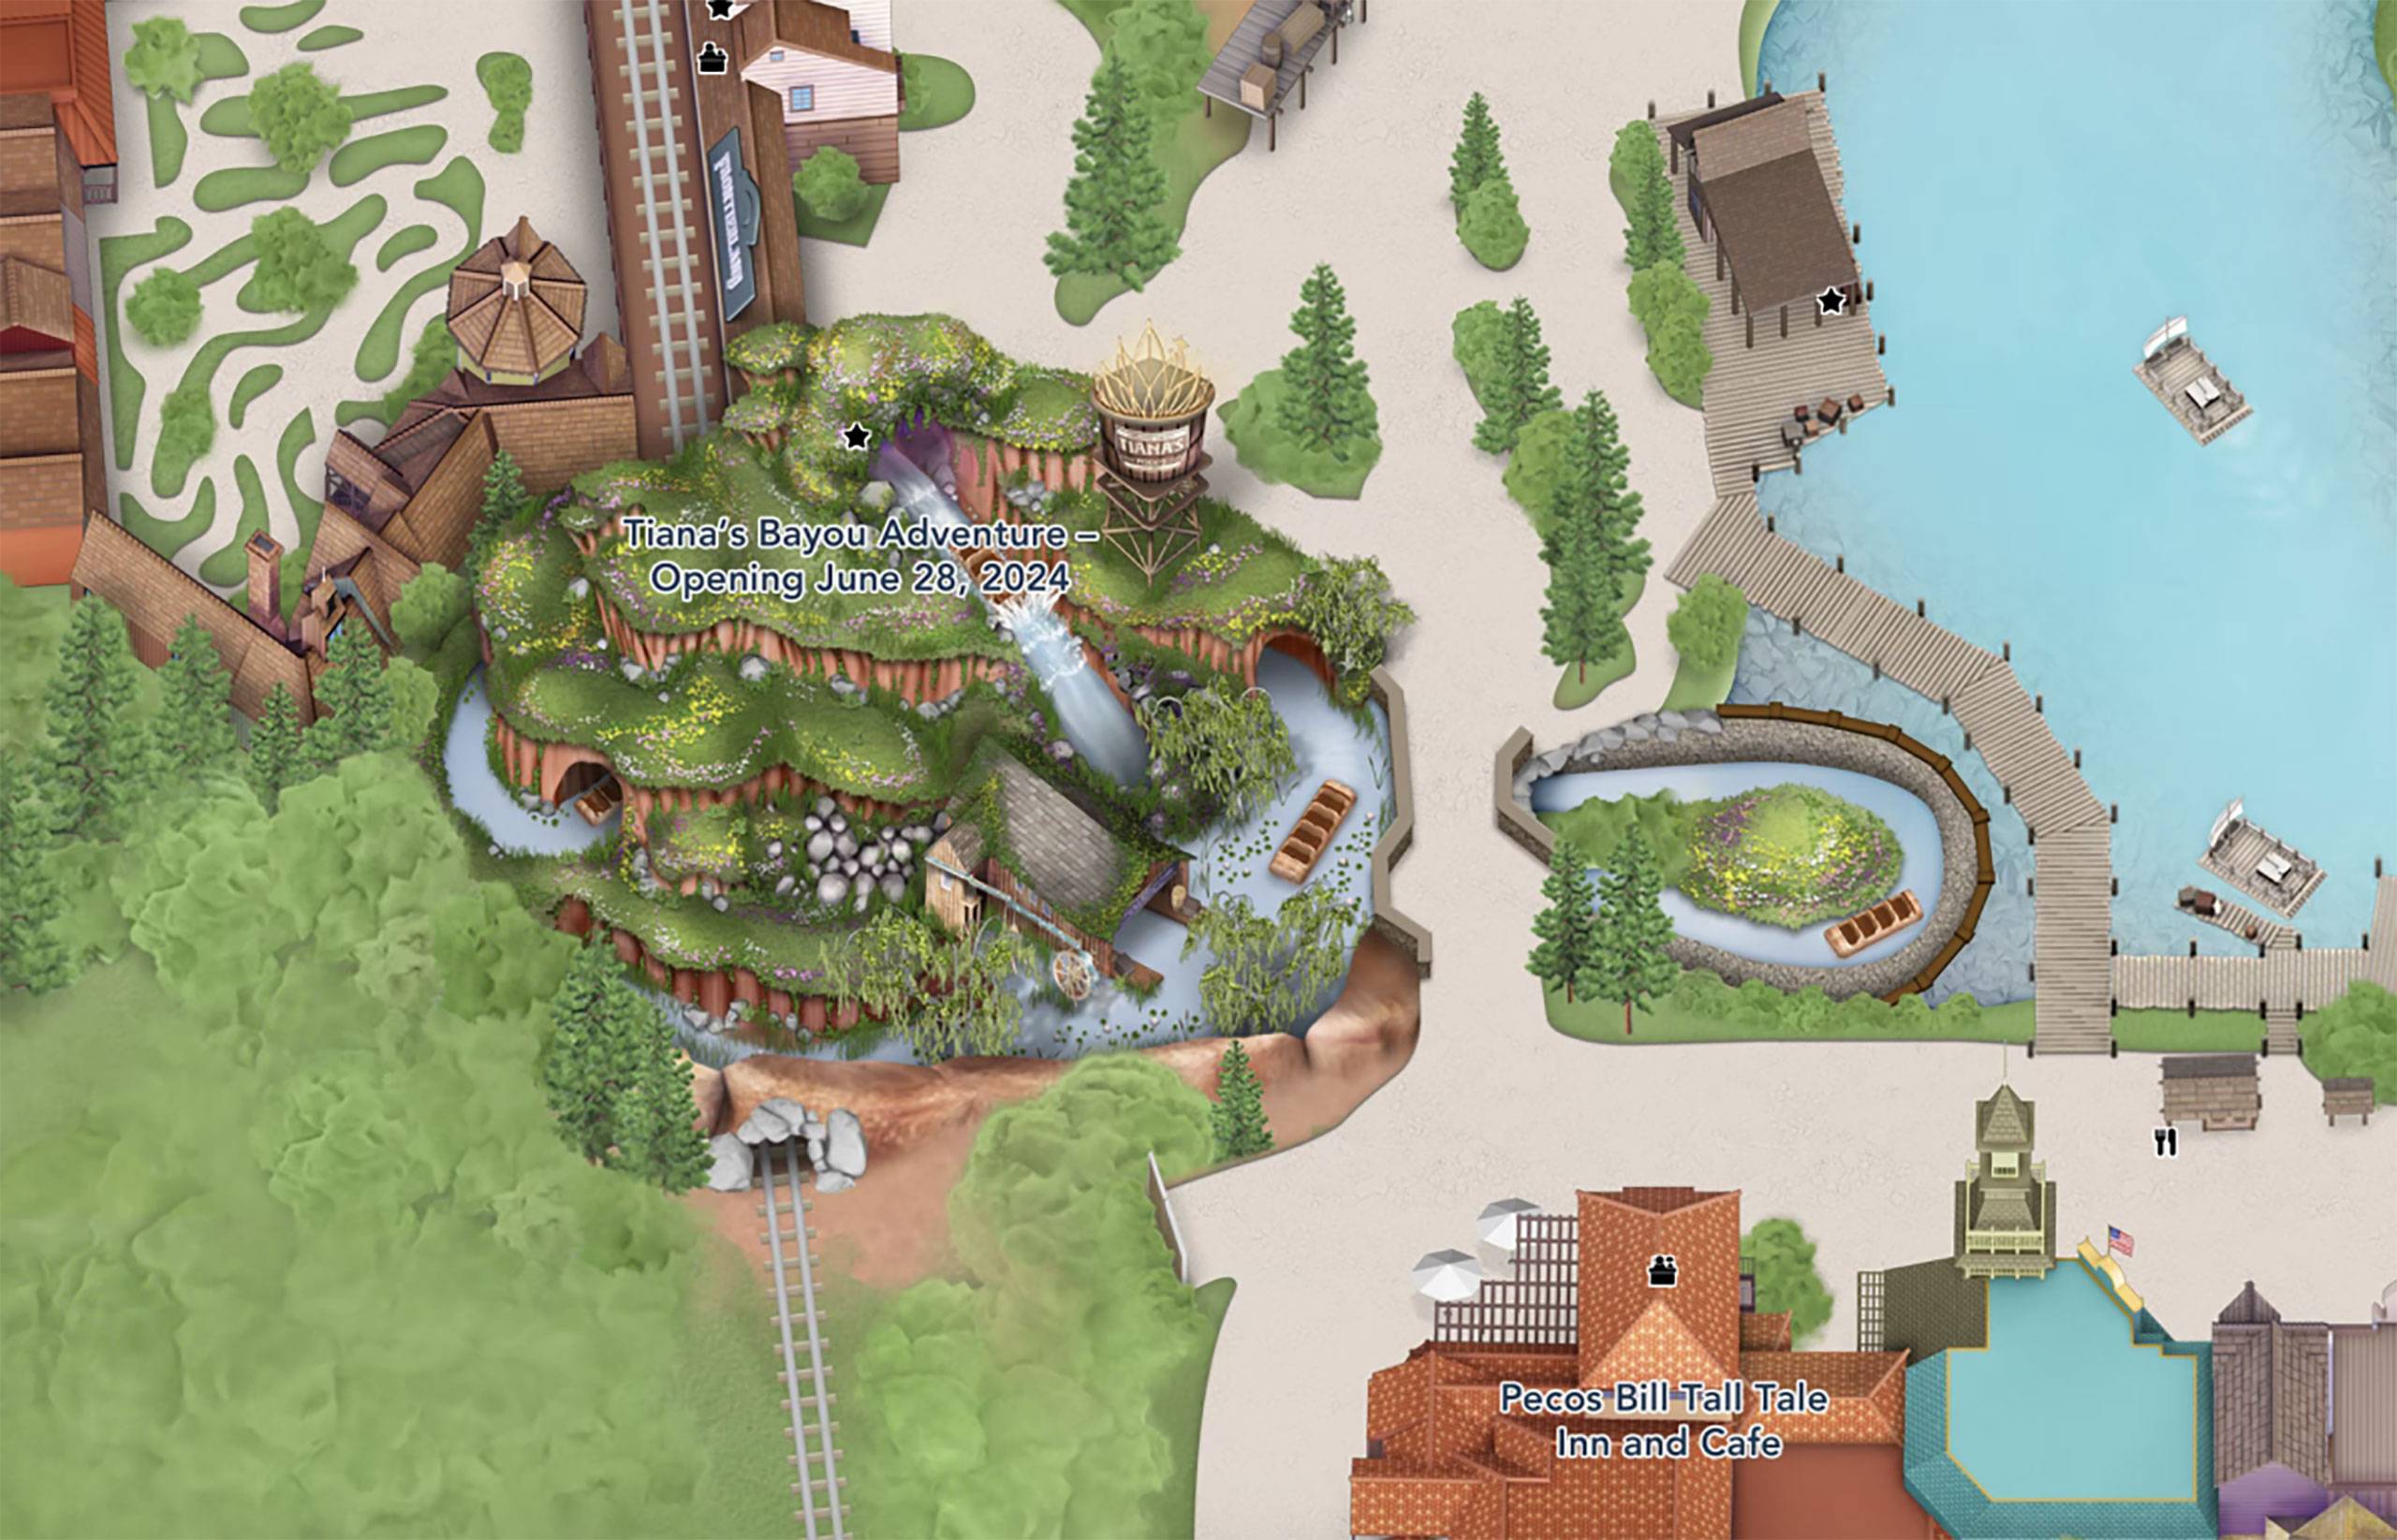 Updated Magic Kingdom Map Features the Upcoming Tiana's Bayou Adventure at Disney World